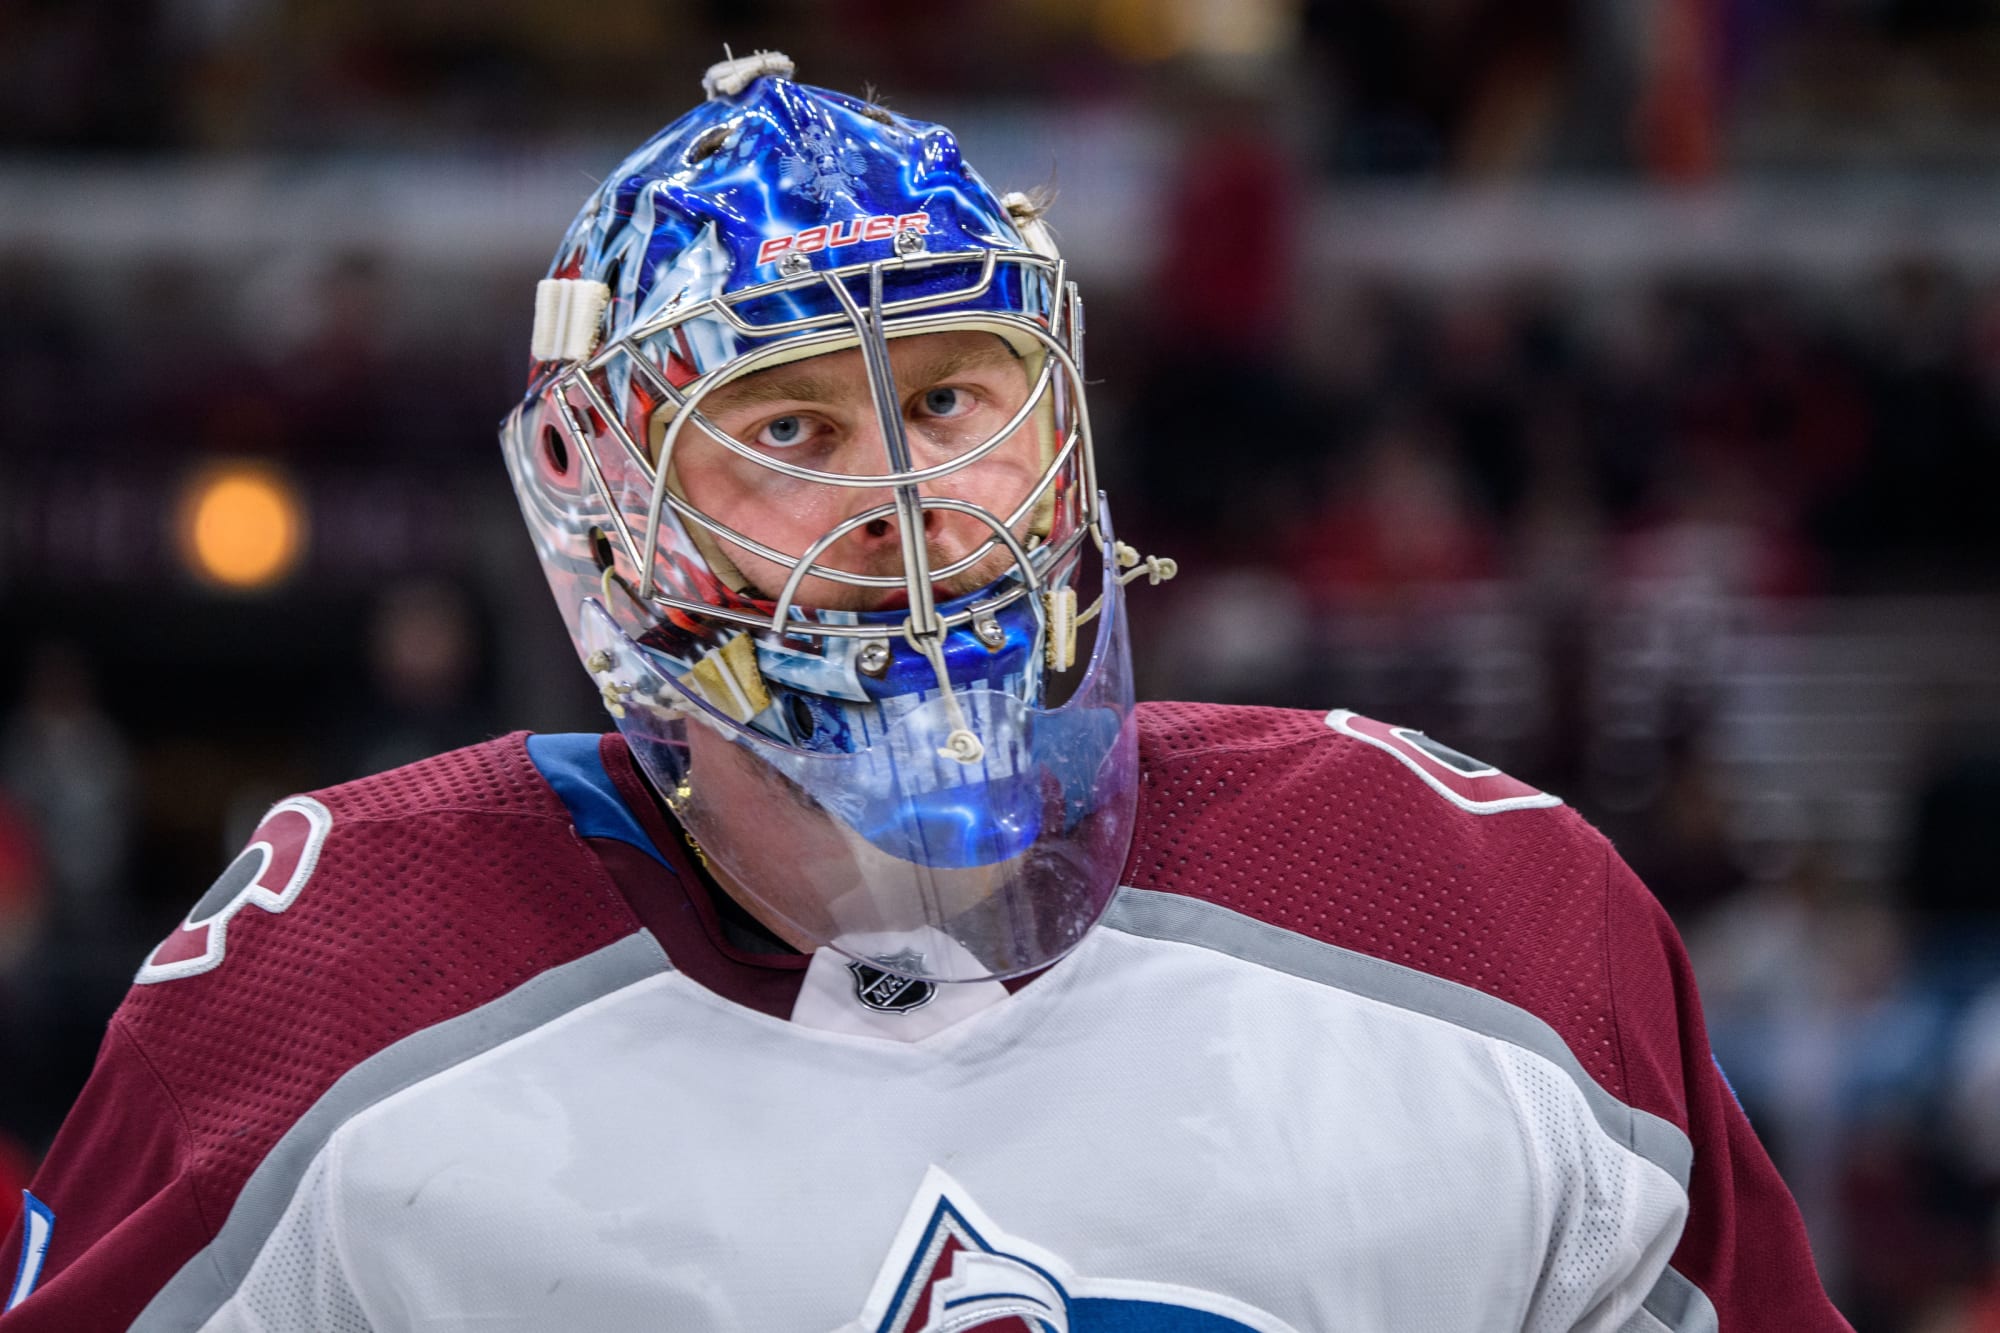 Semyon Varlamov solid and stylish in the net for Avalanche – The